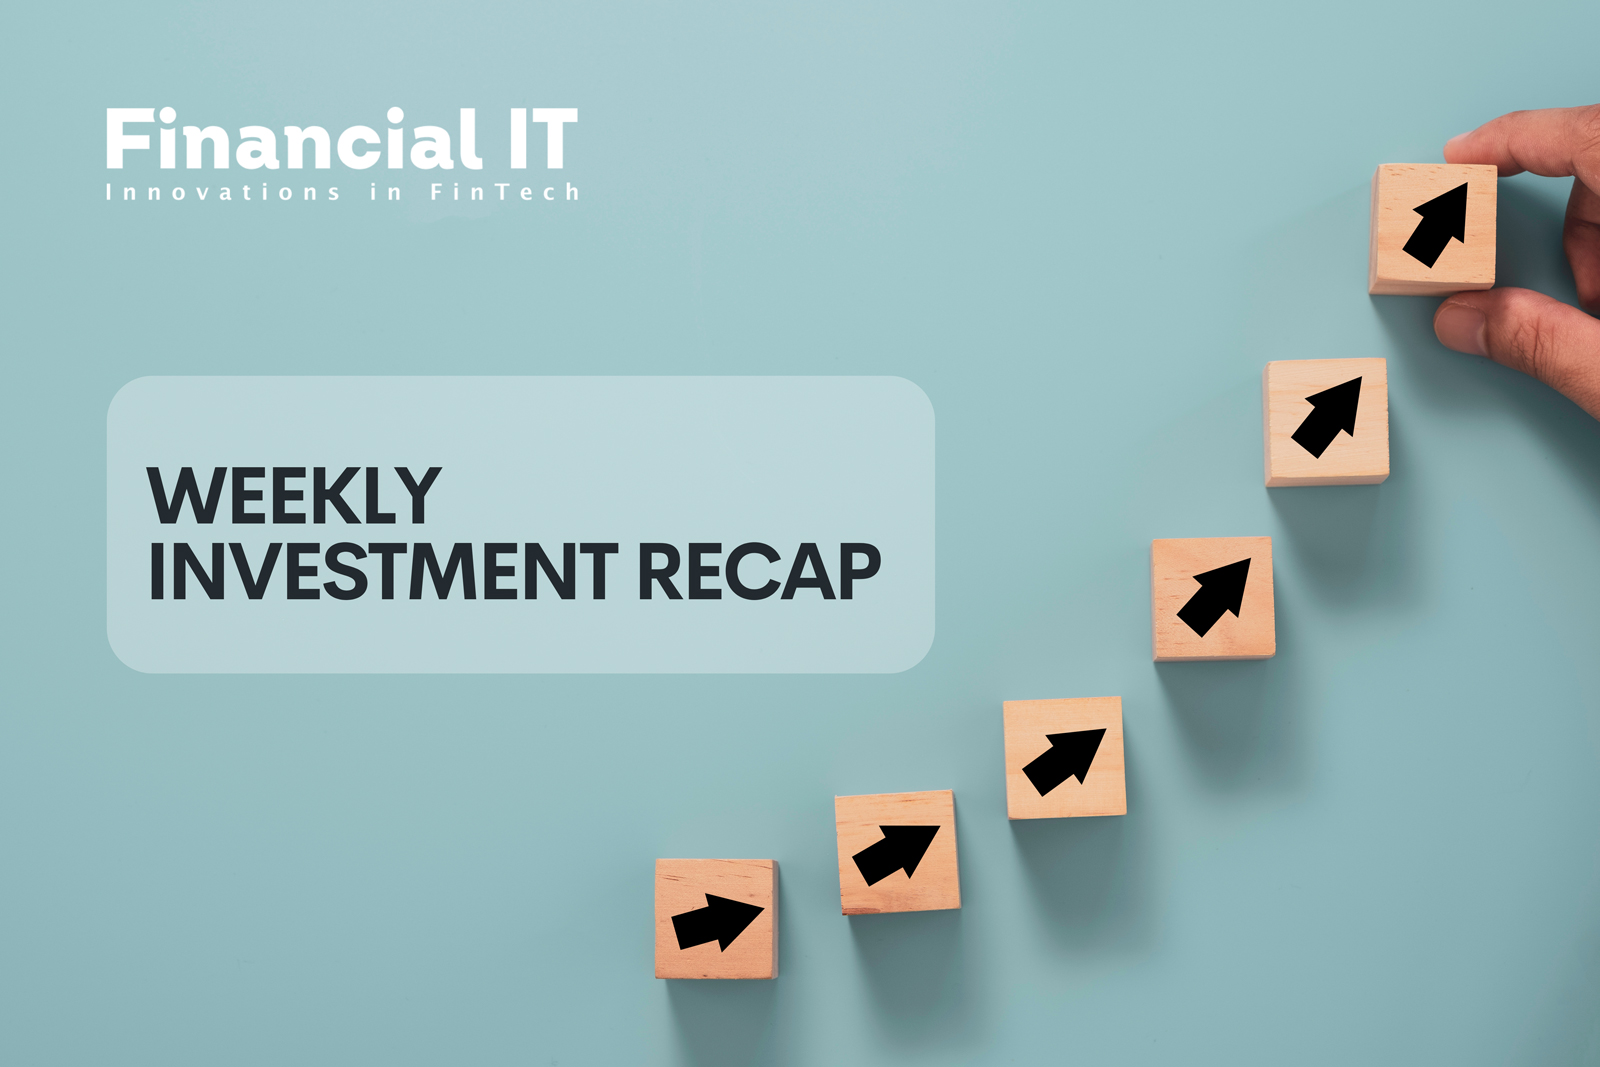 05/12 – Weekly Investment & Fundraising News